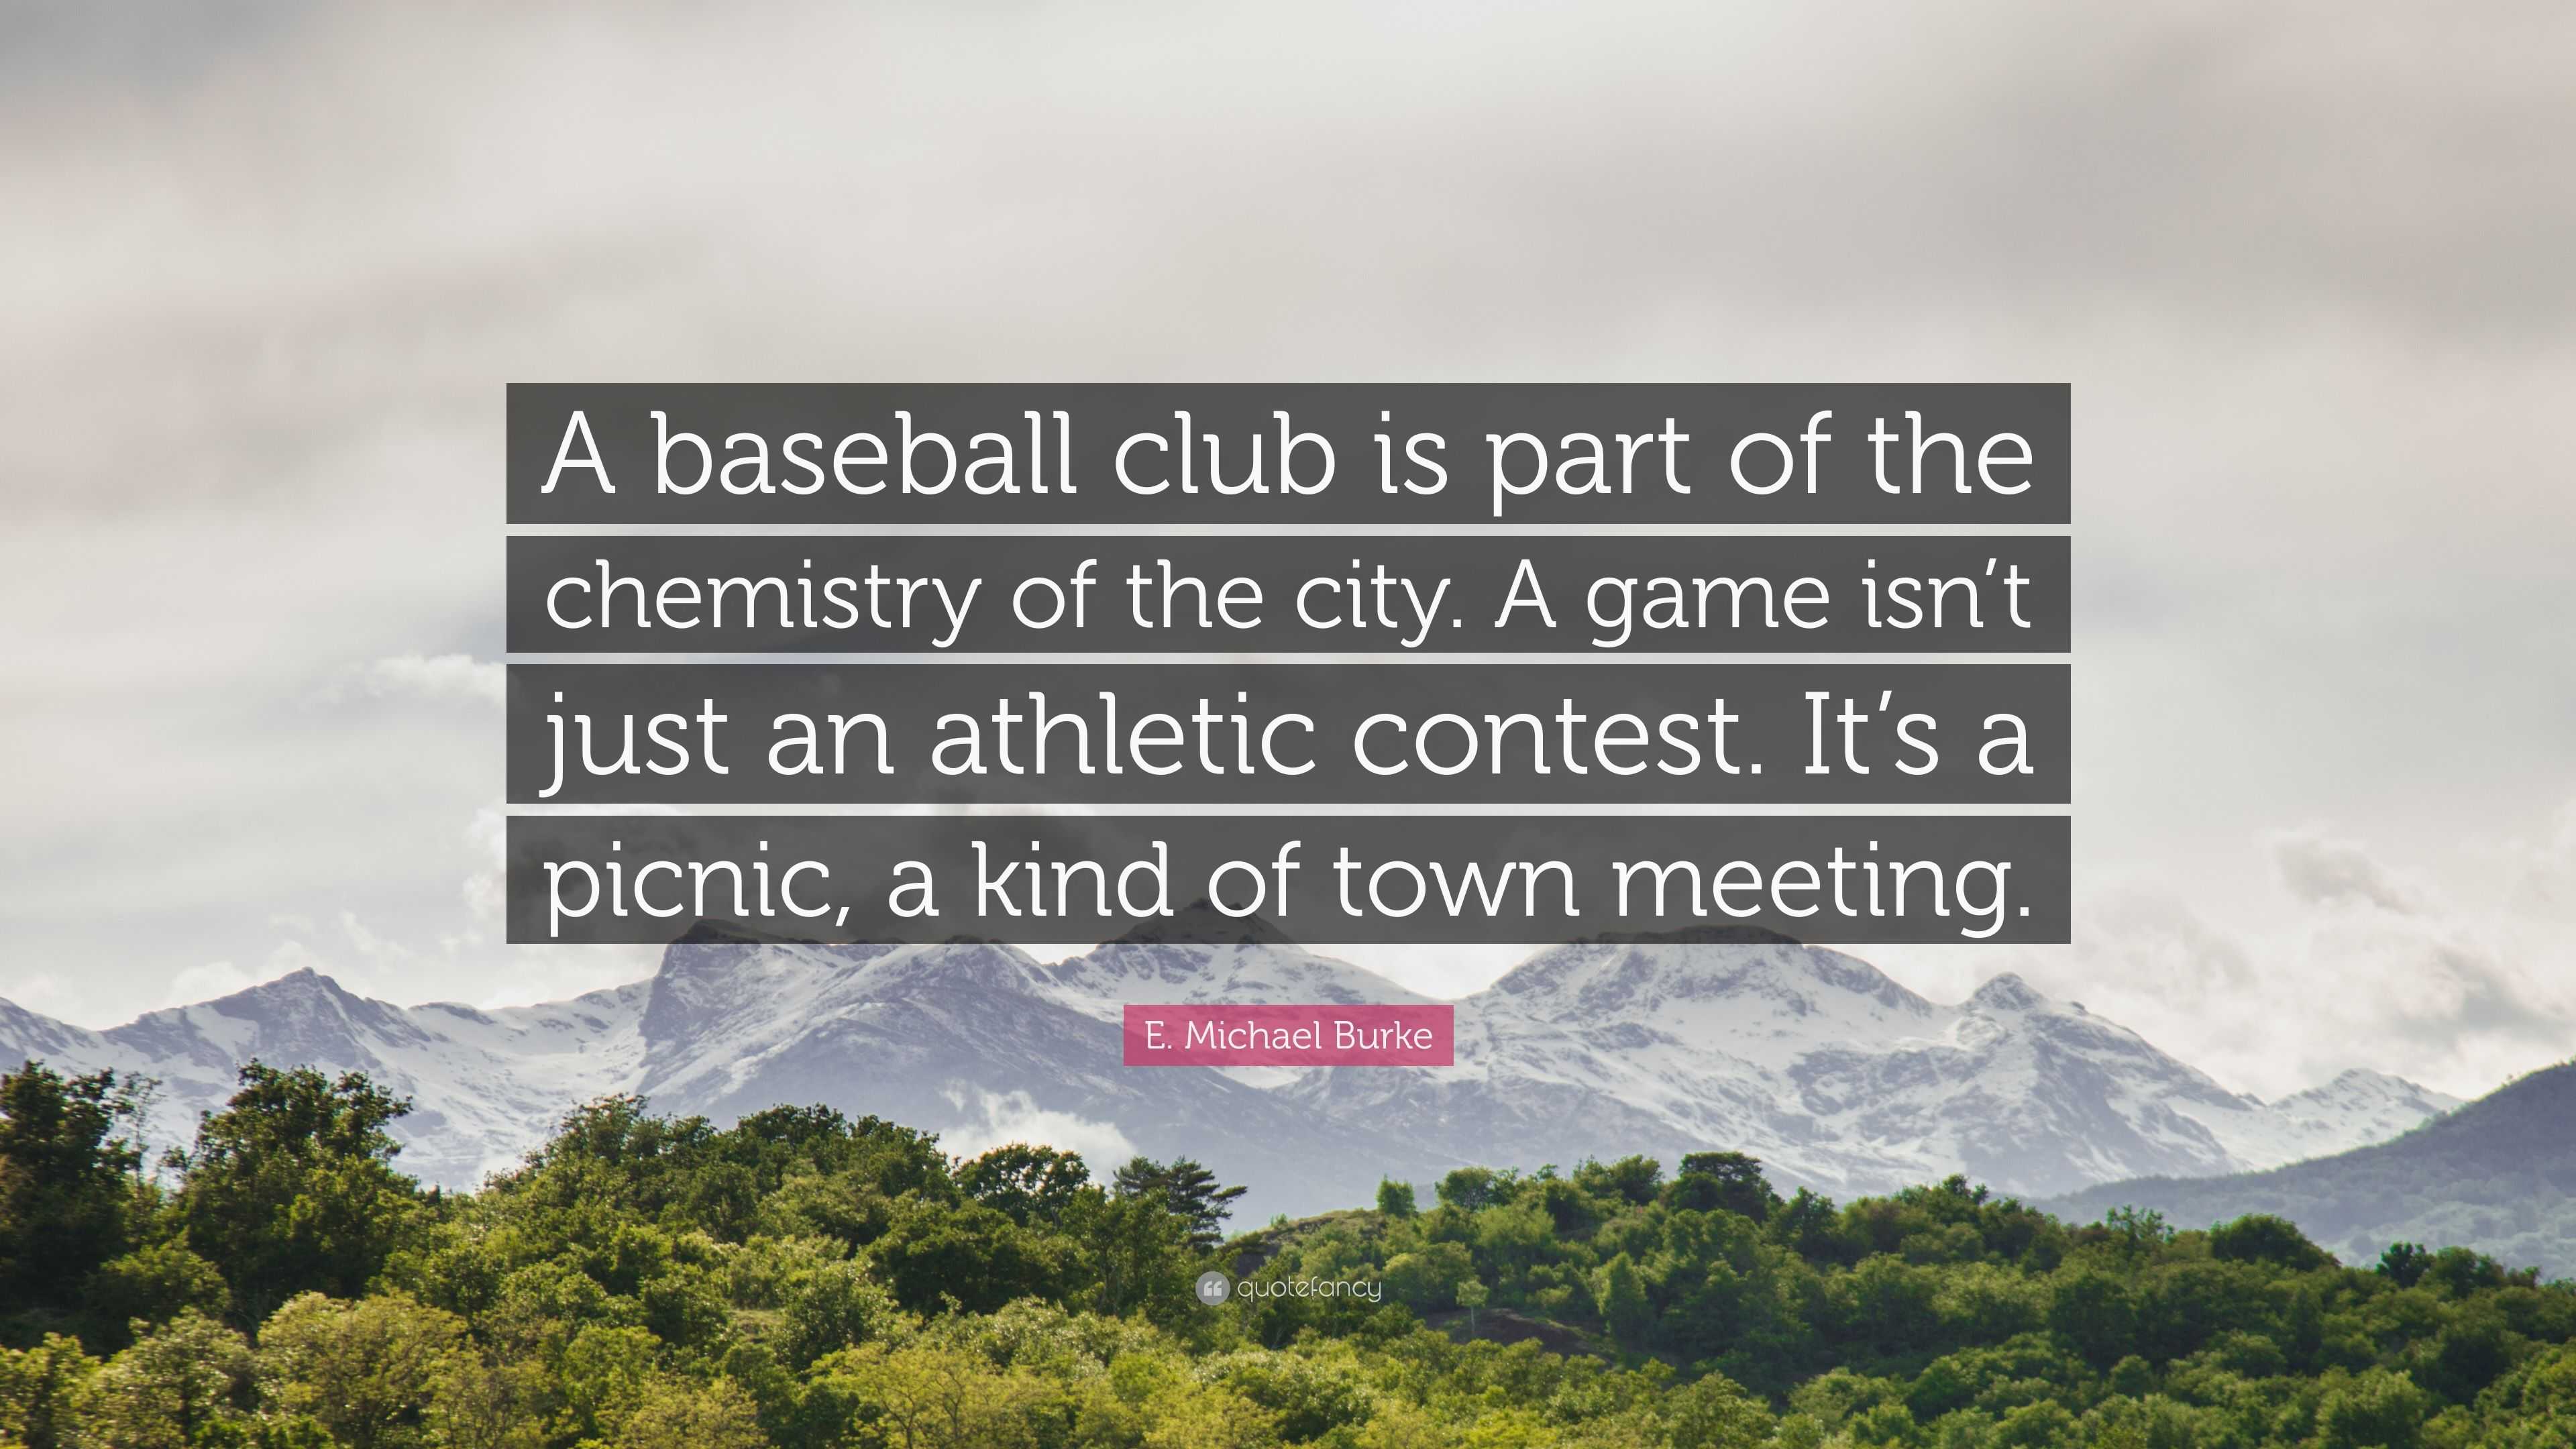 E. Michael Burke quote: A baseball club is part of the chemistry